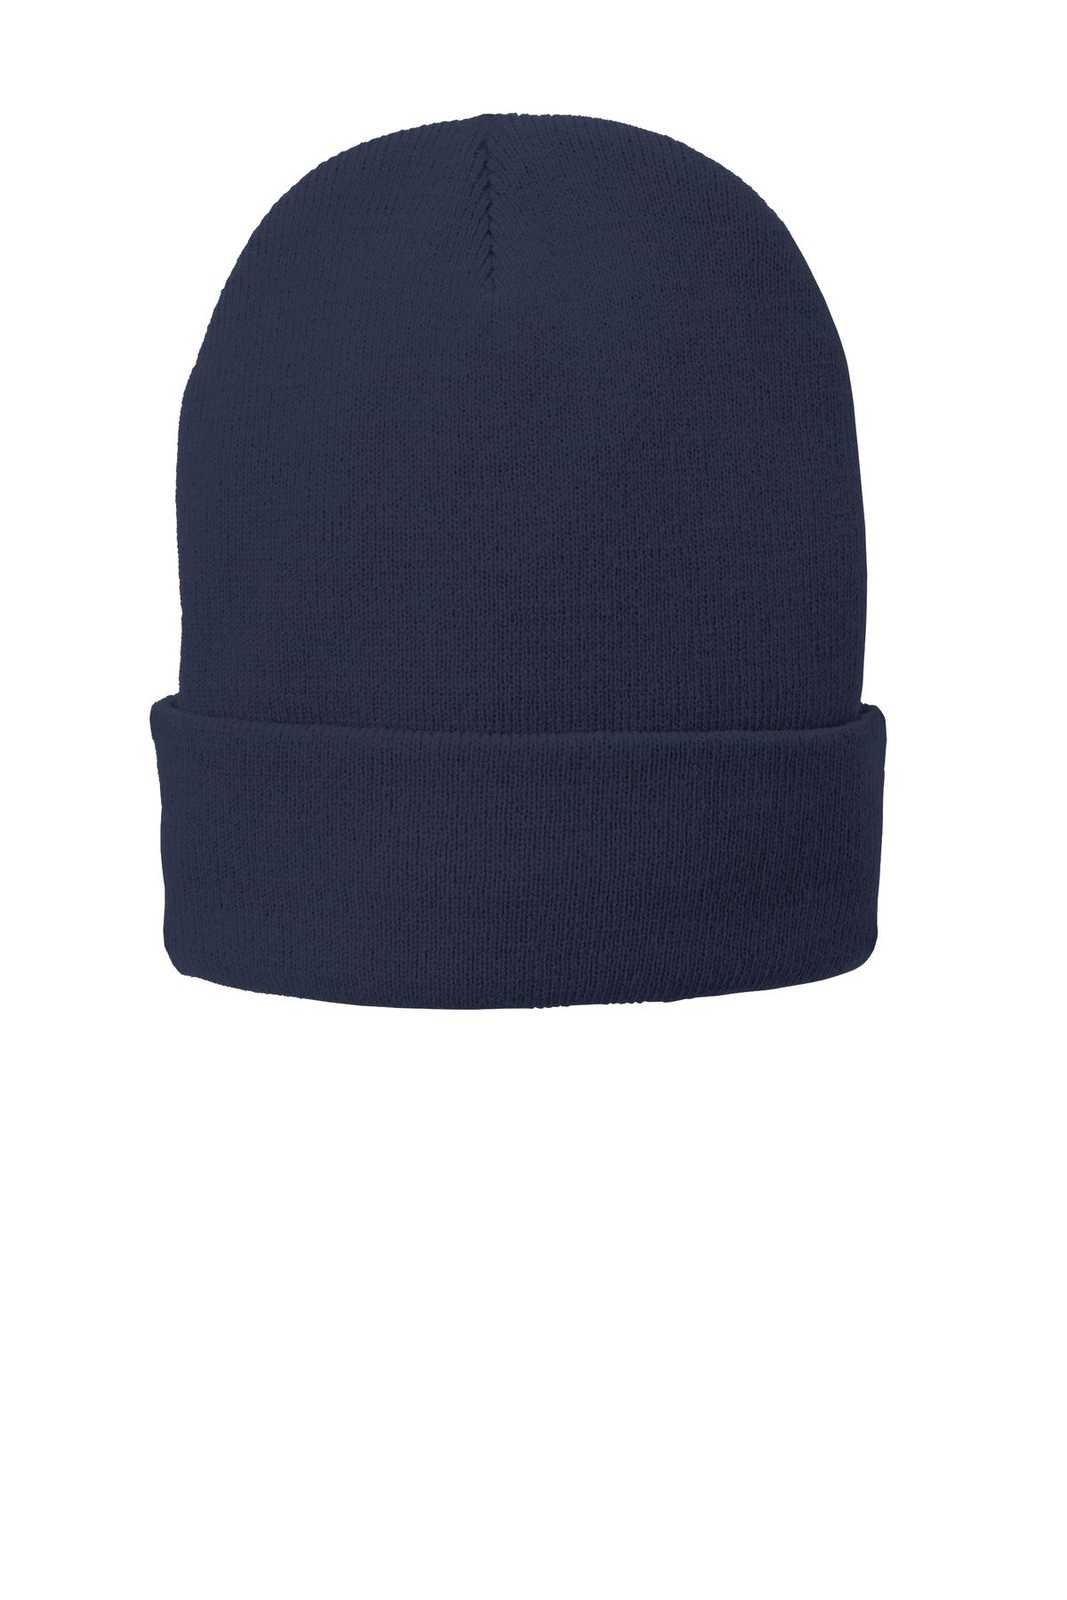 Port & Company CP90L Fleece-Lined Knit Cap with Cuff - Navy - HIT a Double - 1